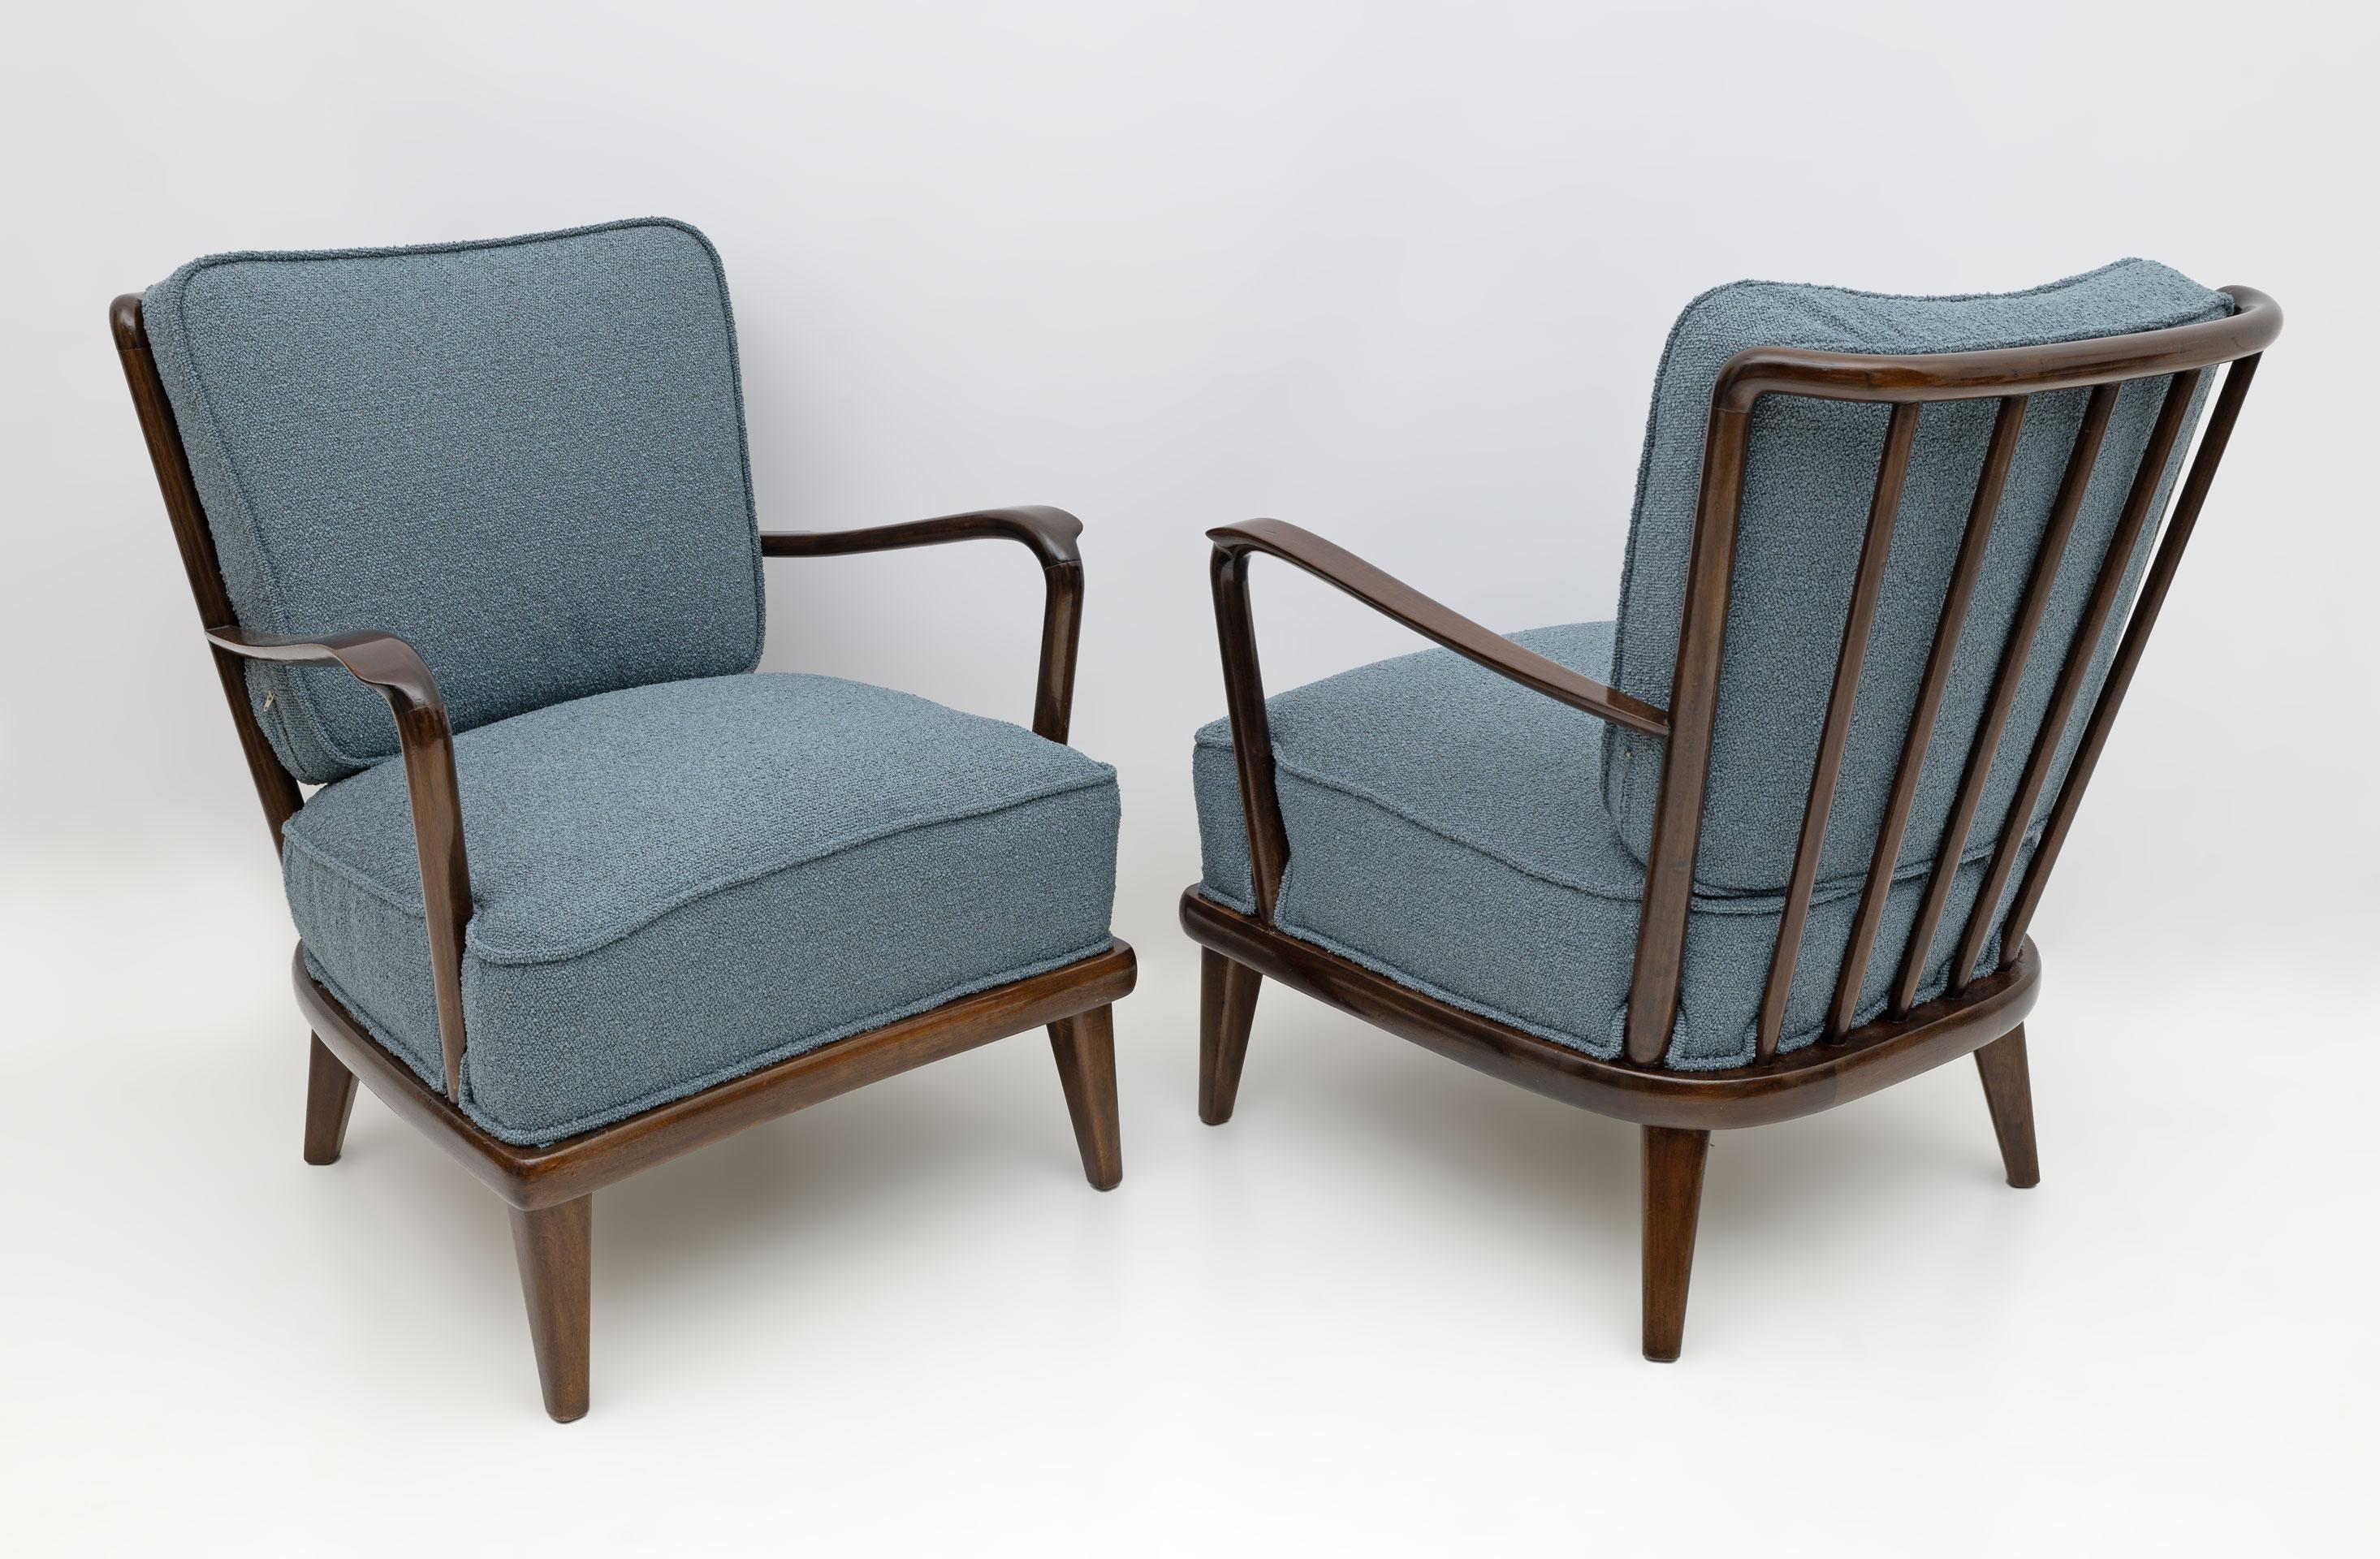 Made in Italy from the 1950s, this pair of spectacular lounge chairs! With its dark walnut frame, understated curved back top and swooping armrests, these lounge chairs represent the best of elegant modern Italian design. Upholstered in fine bouclé,